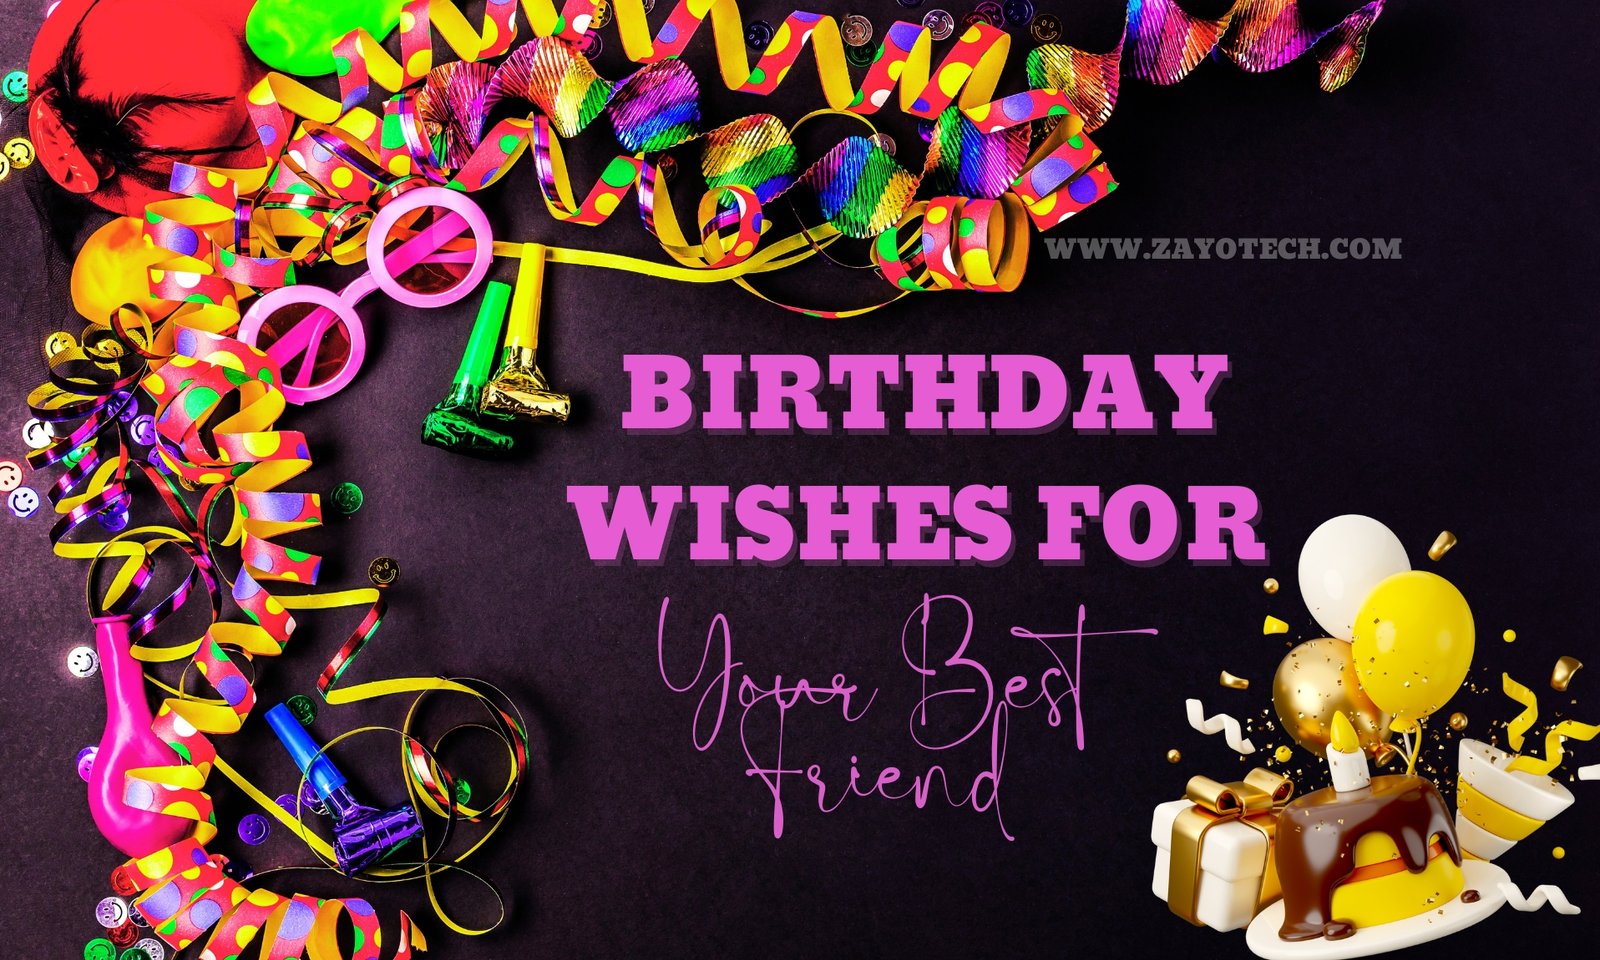 Unique Birthday Wishes for Your Best Friend